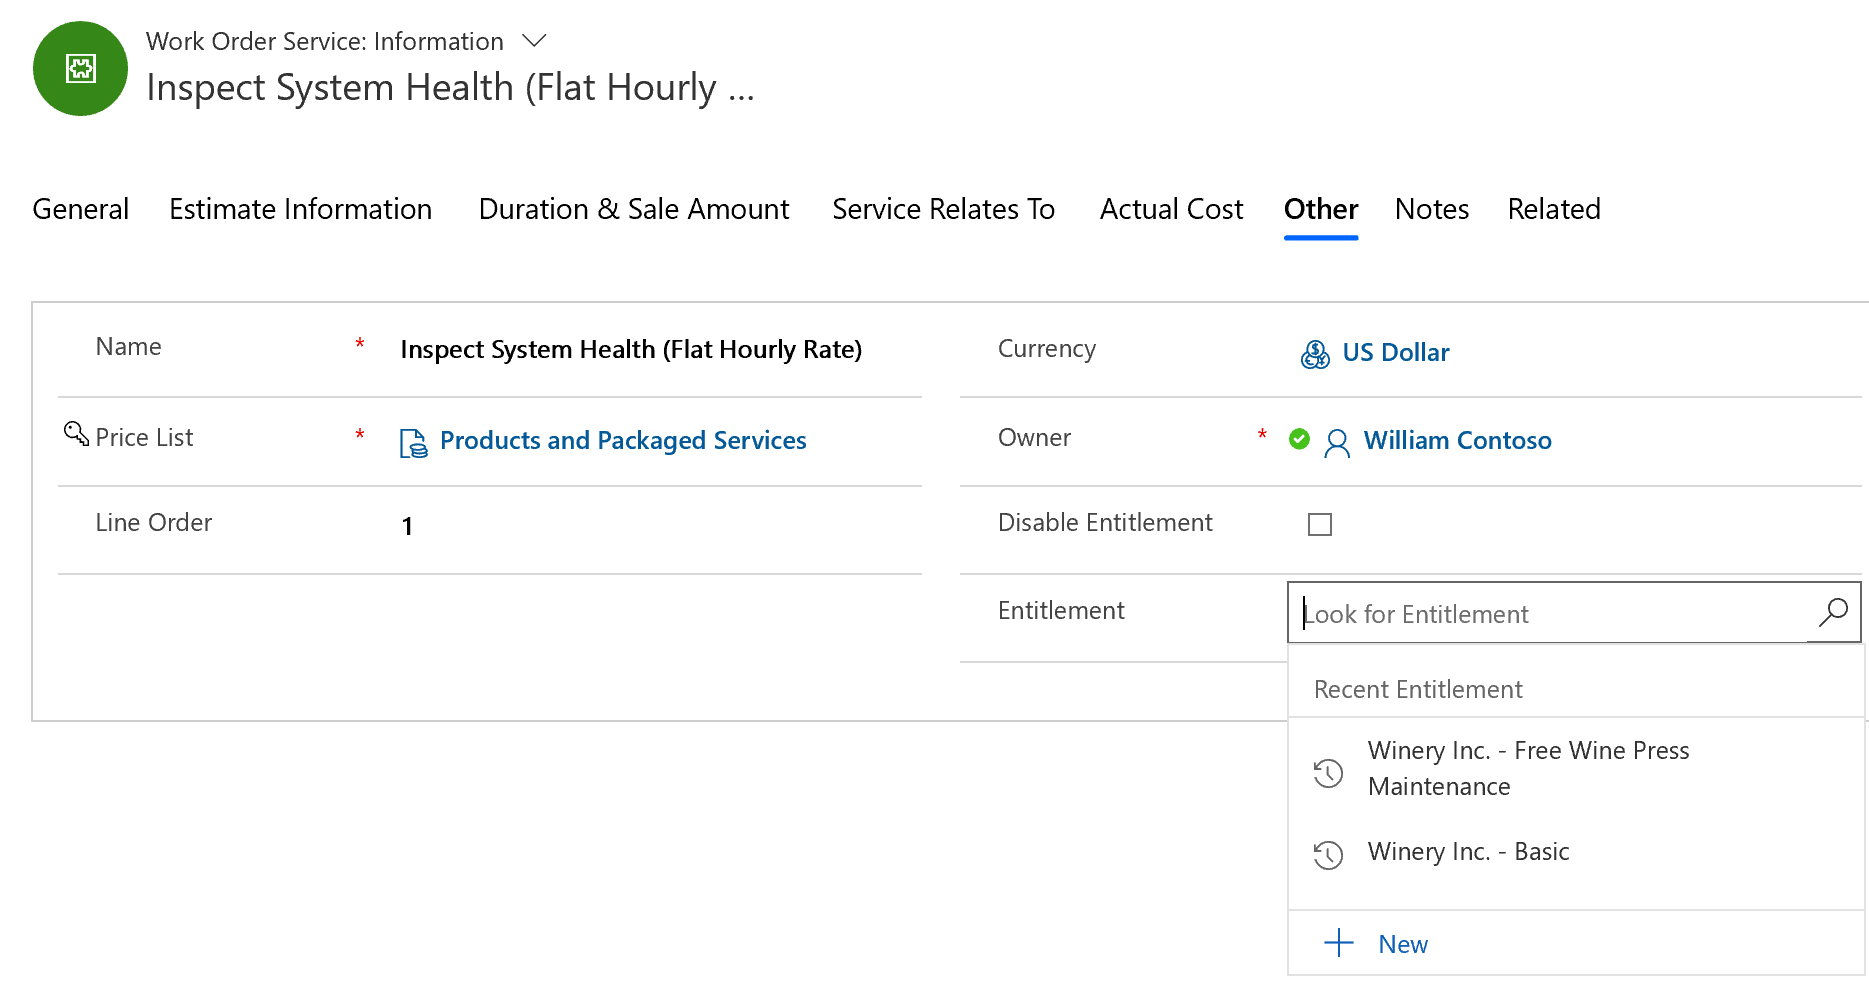 Screenshot of 2 entitlements to choose from for a single work order product.